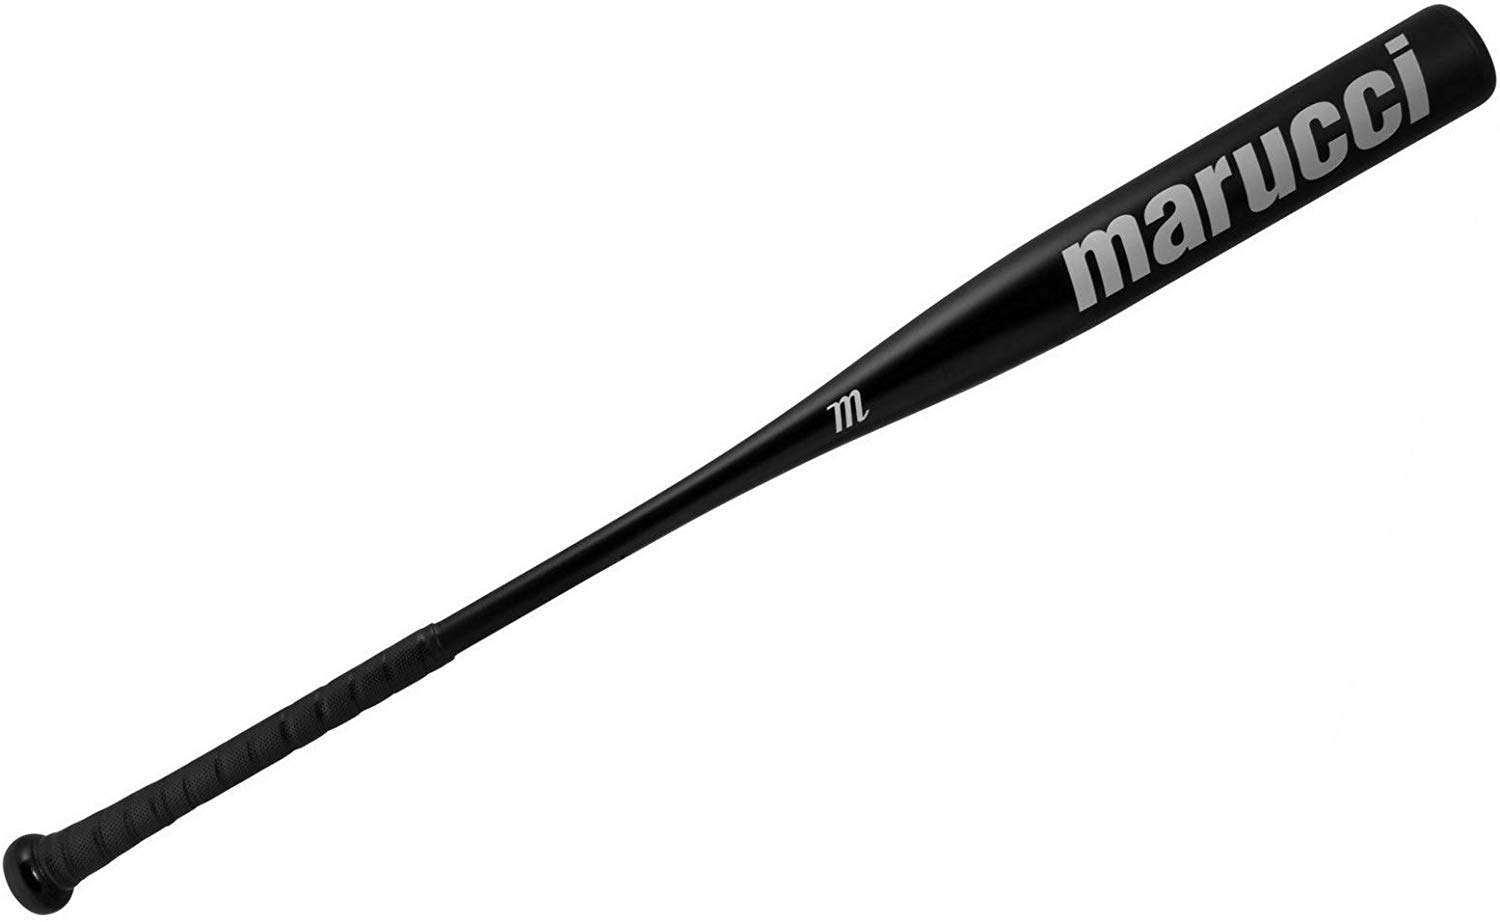 The Marucci Aluminum Fungo bat is a coach's dream. High-strength alloy construction, patented AV2 knob and soft-touch grip allow you to hit in-and-out with ease and comfort. Comes with a 1 year manufacturers warranty from Marucci. - One-piece aluminum alloy construction - 2nd Generation AV2 Anti-Vibration knob - Professionally inspired handle - Removable taper and ergonomic knob shape - Micro-perforated soft-touch grip - 1 Year Manufacturer's Warranty